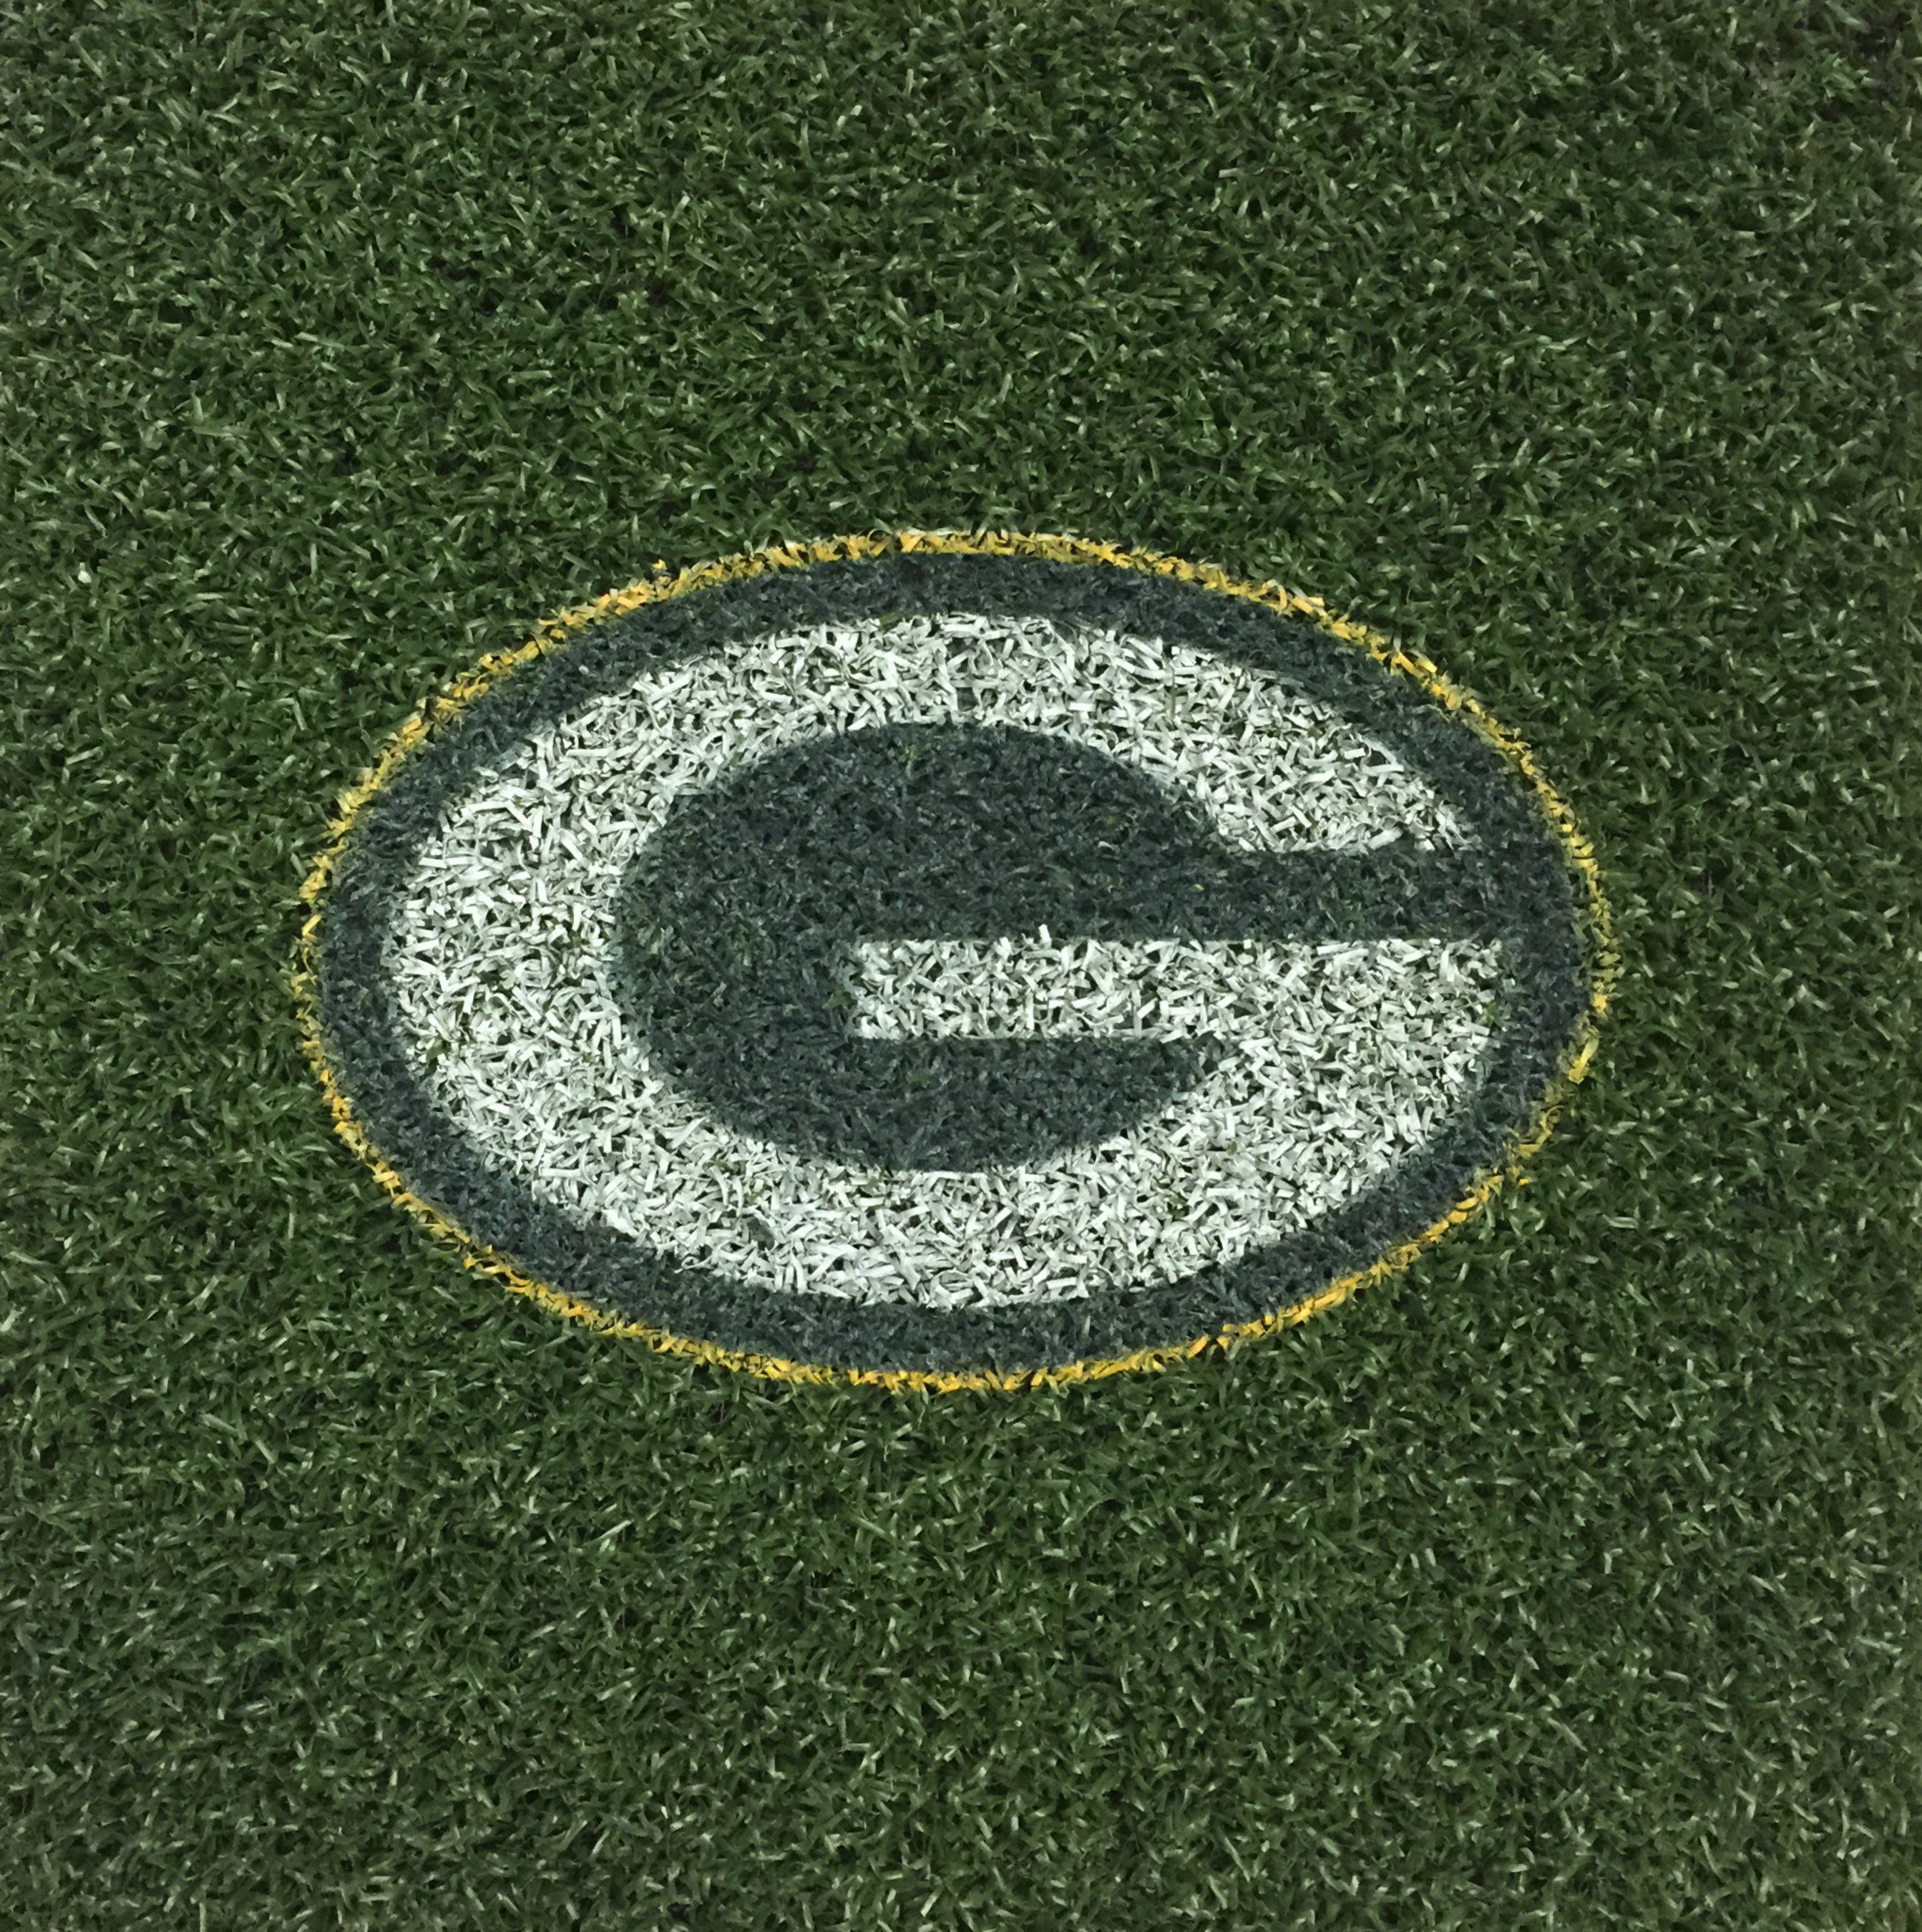 The turf pieces in Wisconsin are branded with the Green Bay Packers "G" logo.